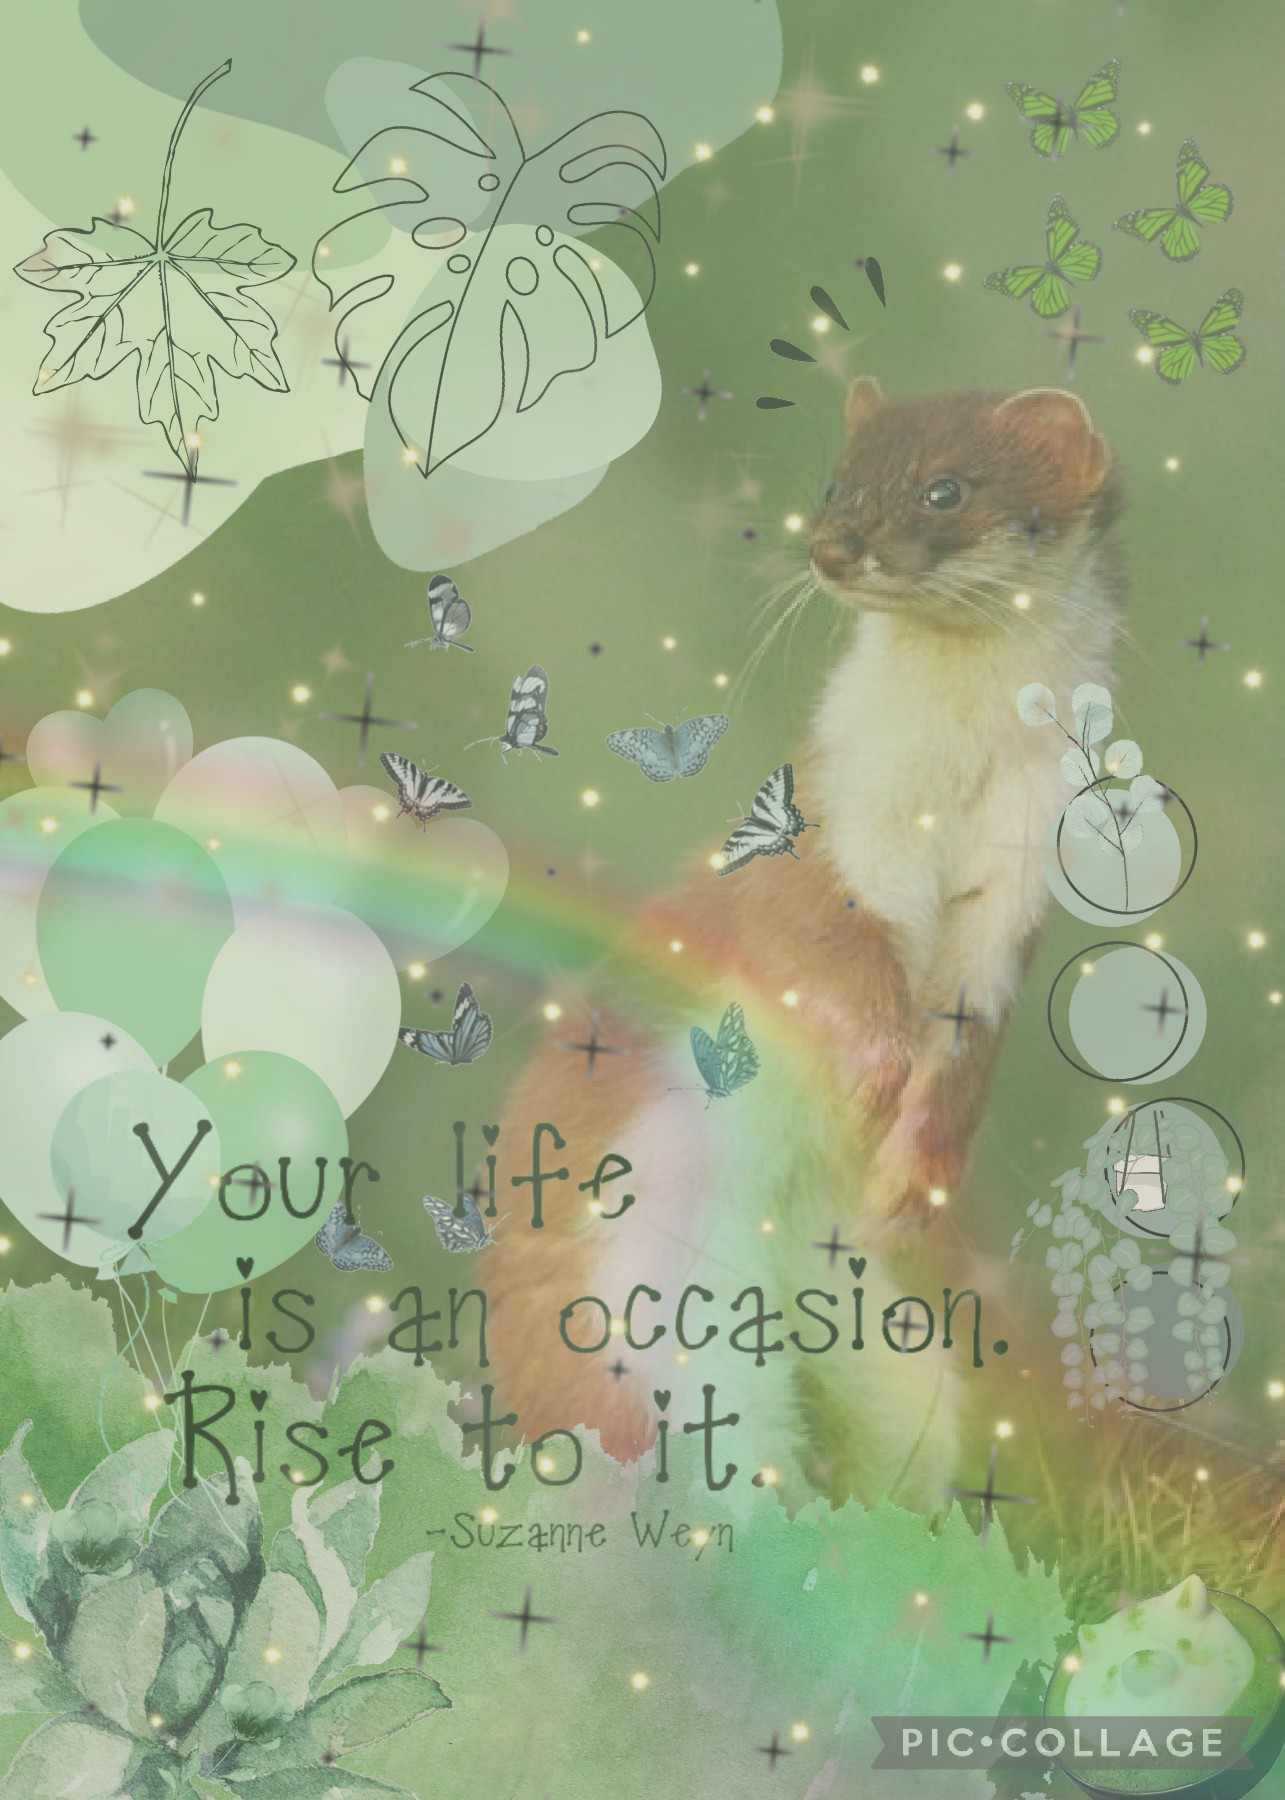 💚🐾🌿

Aesthetic Green Stoat Collage

